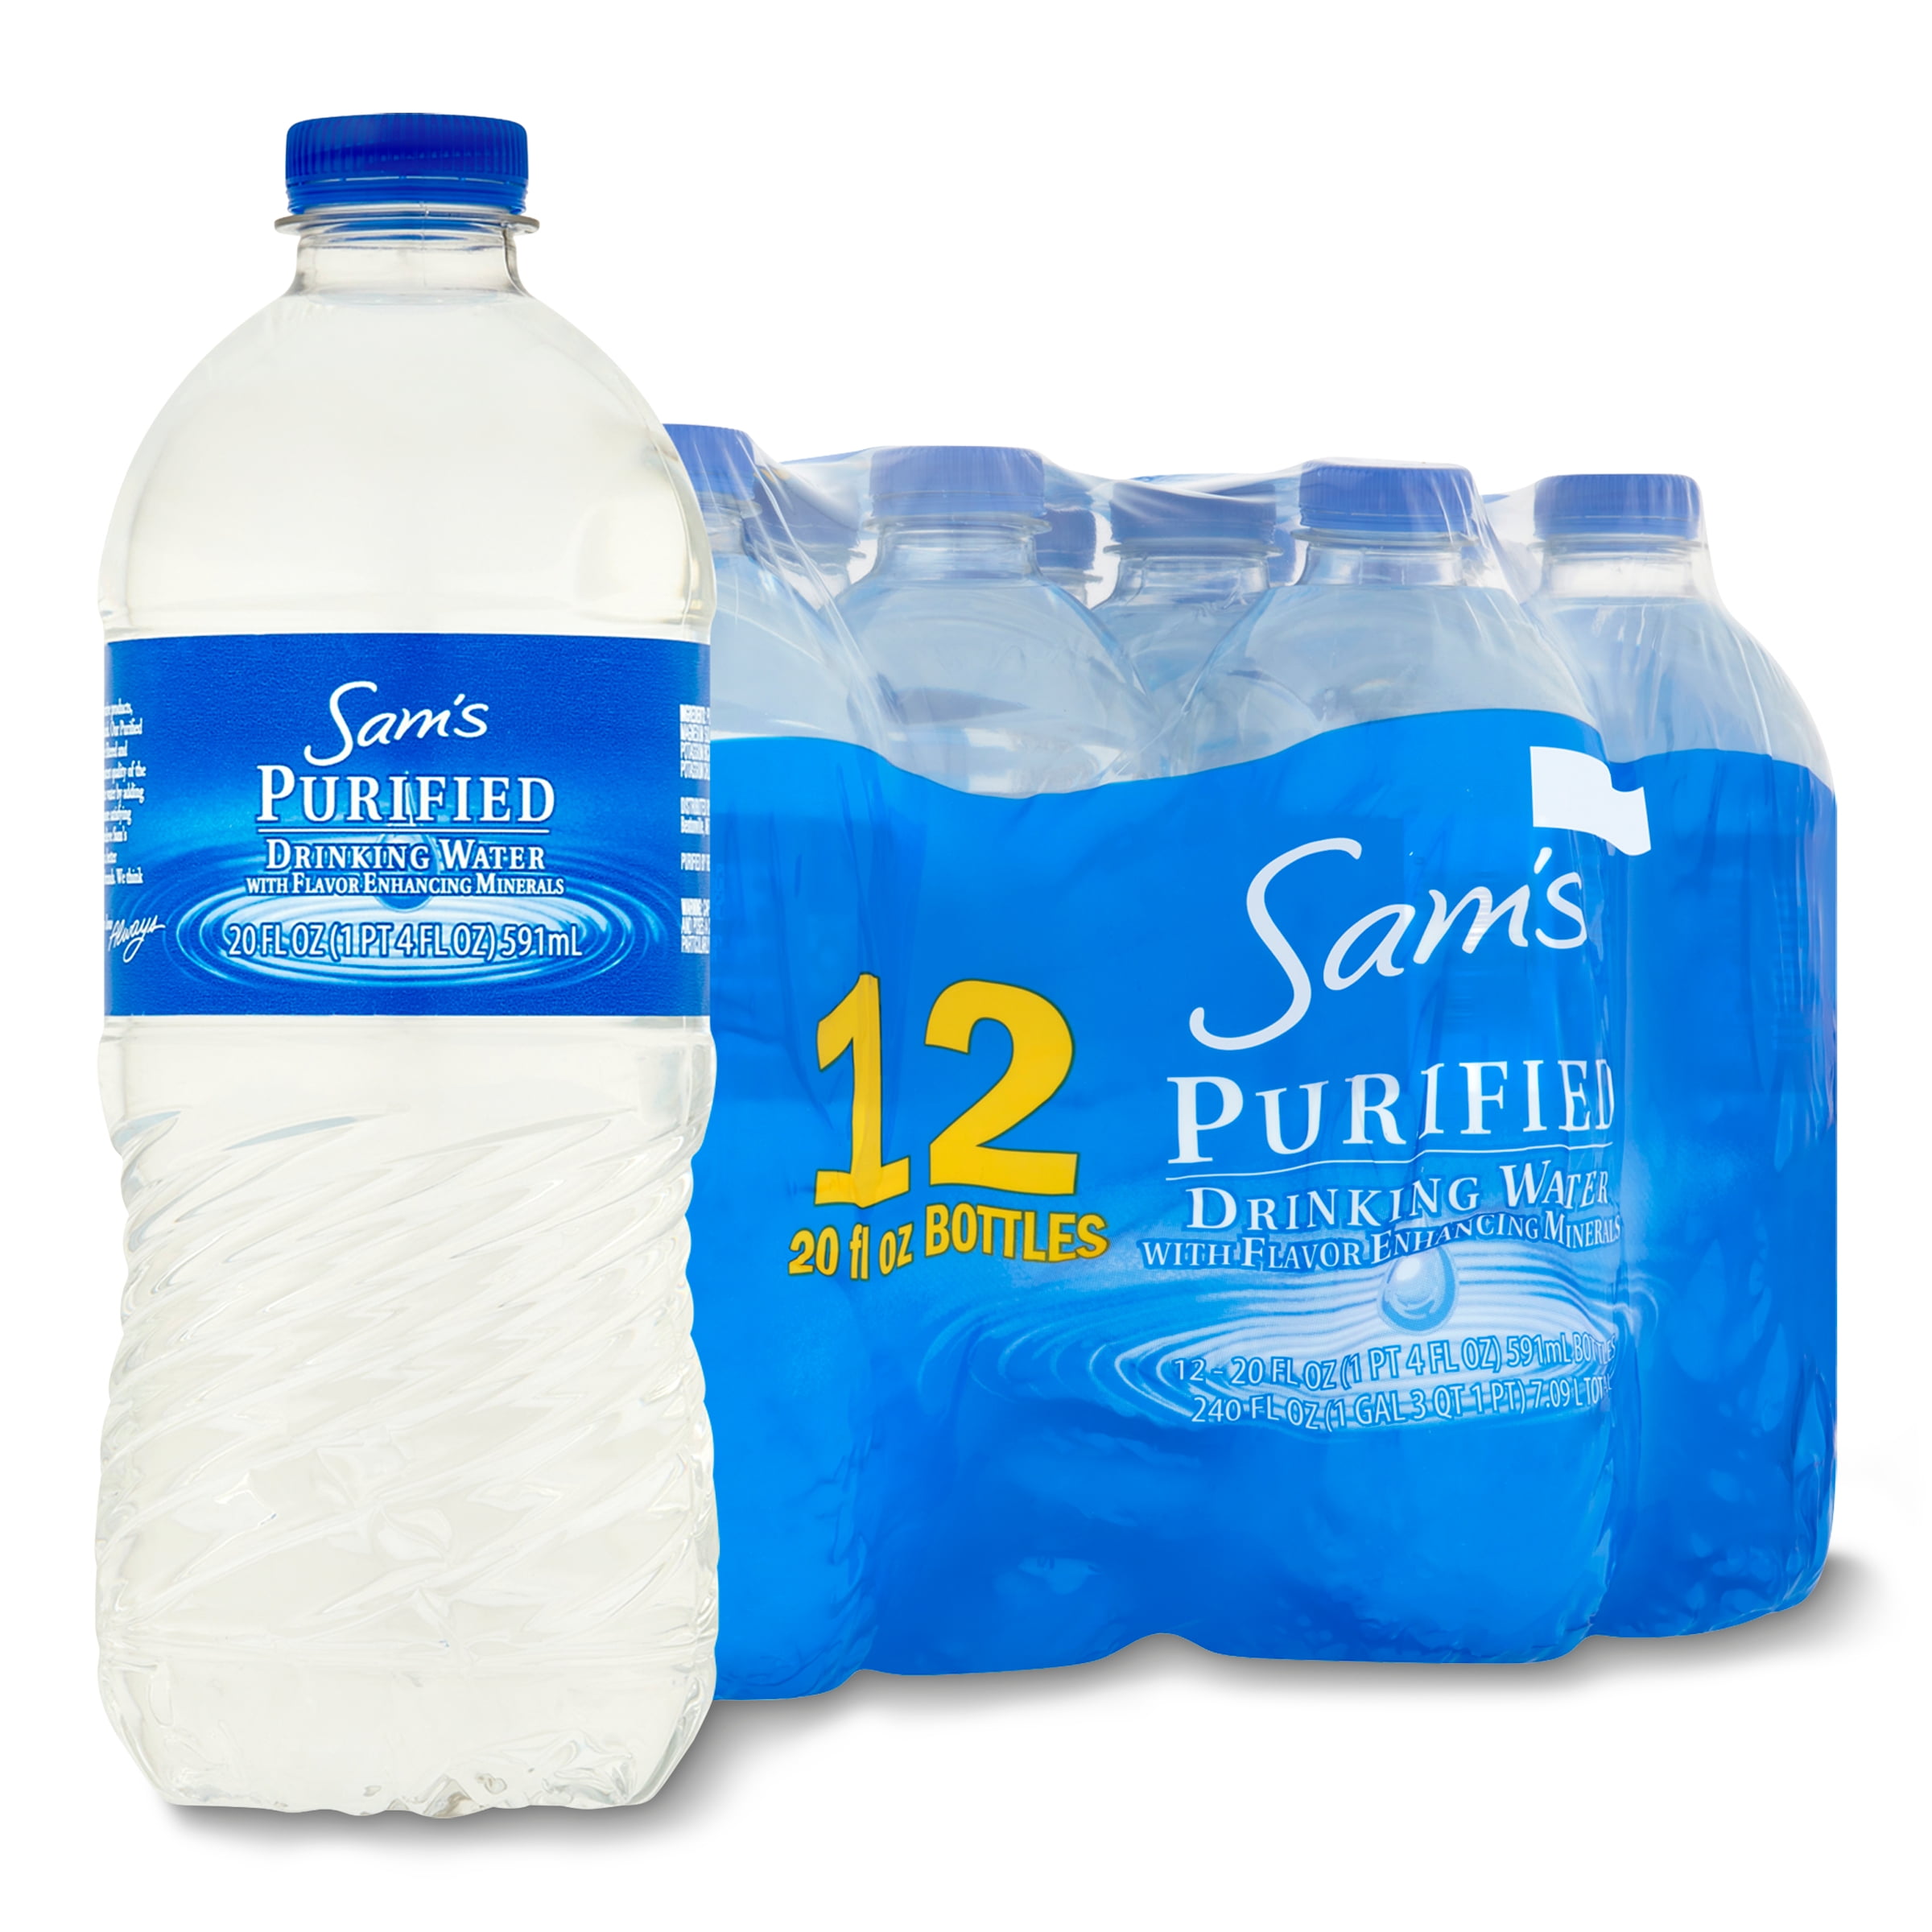 Sam's Choice Purified Drinking Water, 20 Fl Oz, 12 Count Bottles -  